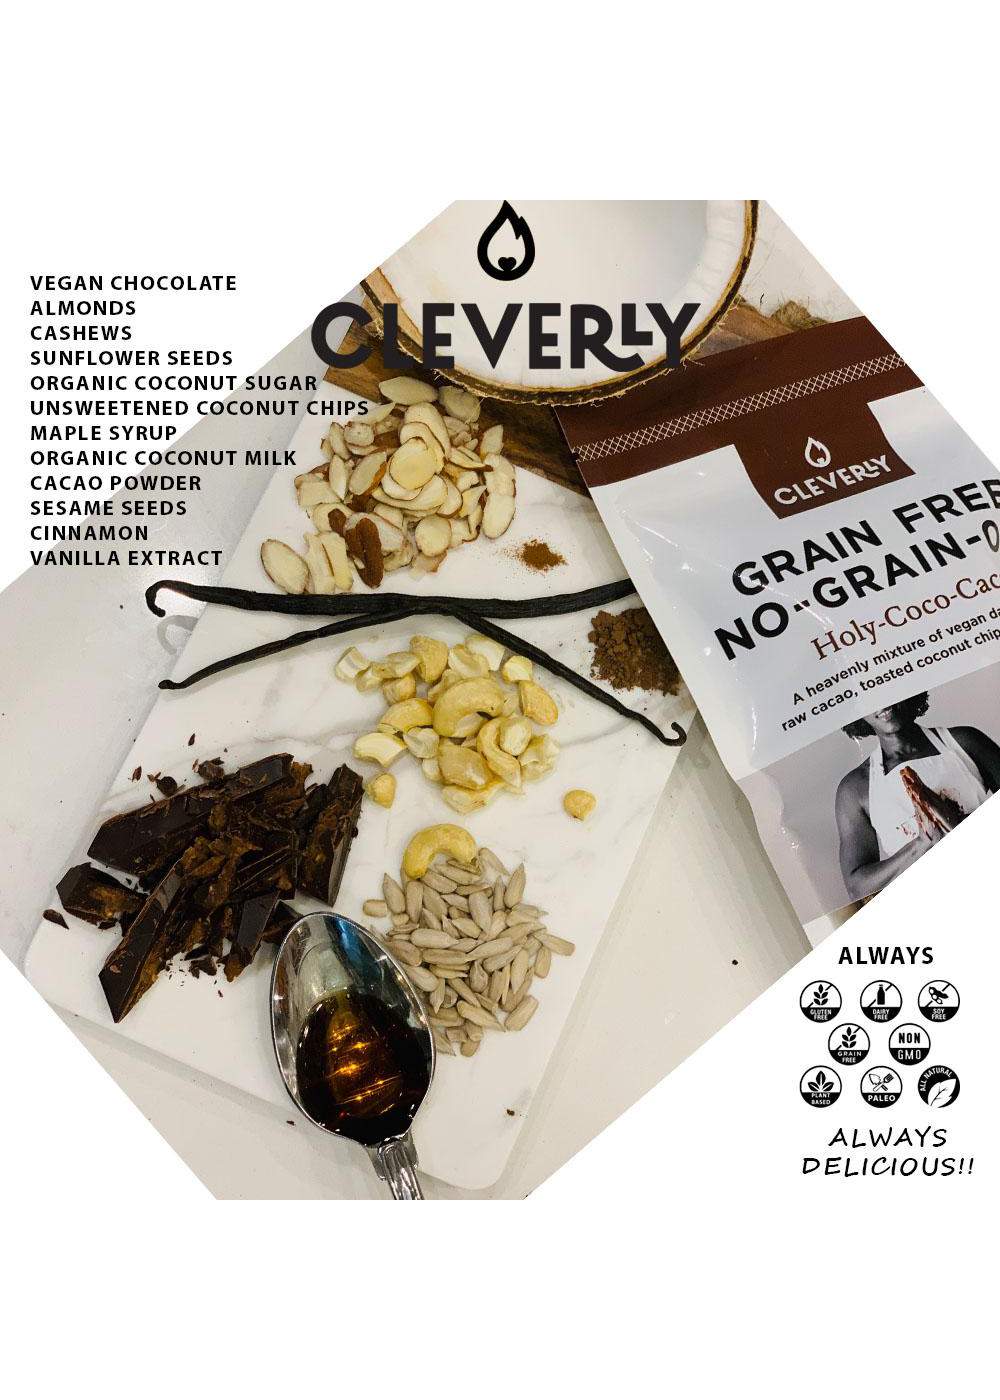 Cleverly Grain-Free No-Grain-Ola - Holy-Coco-Cacao!; image 2 of 6